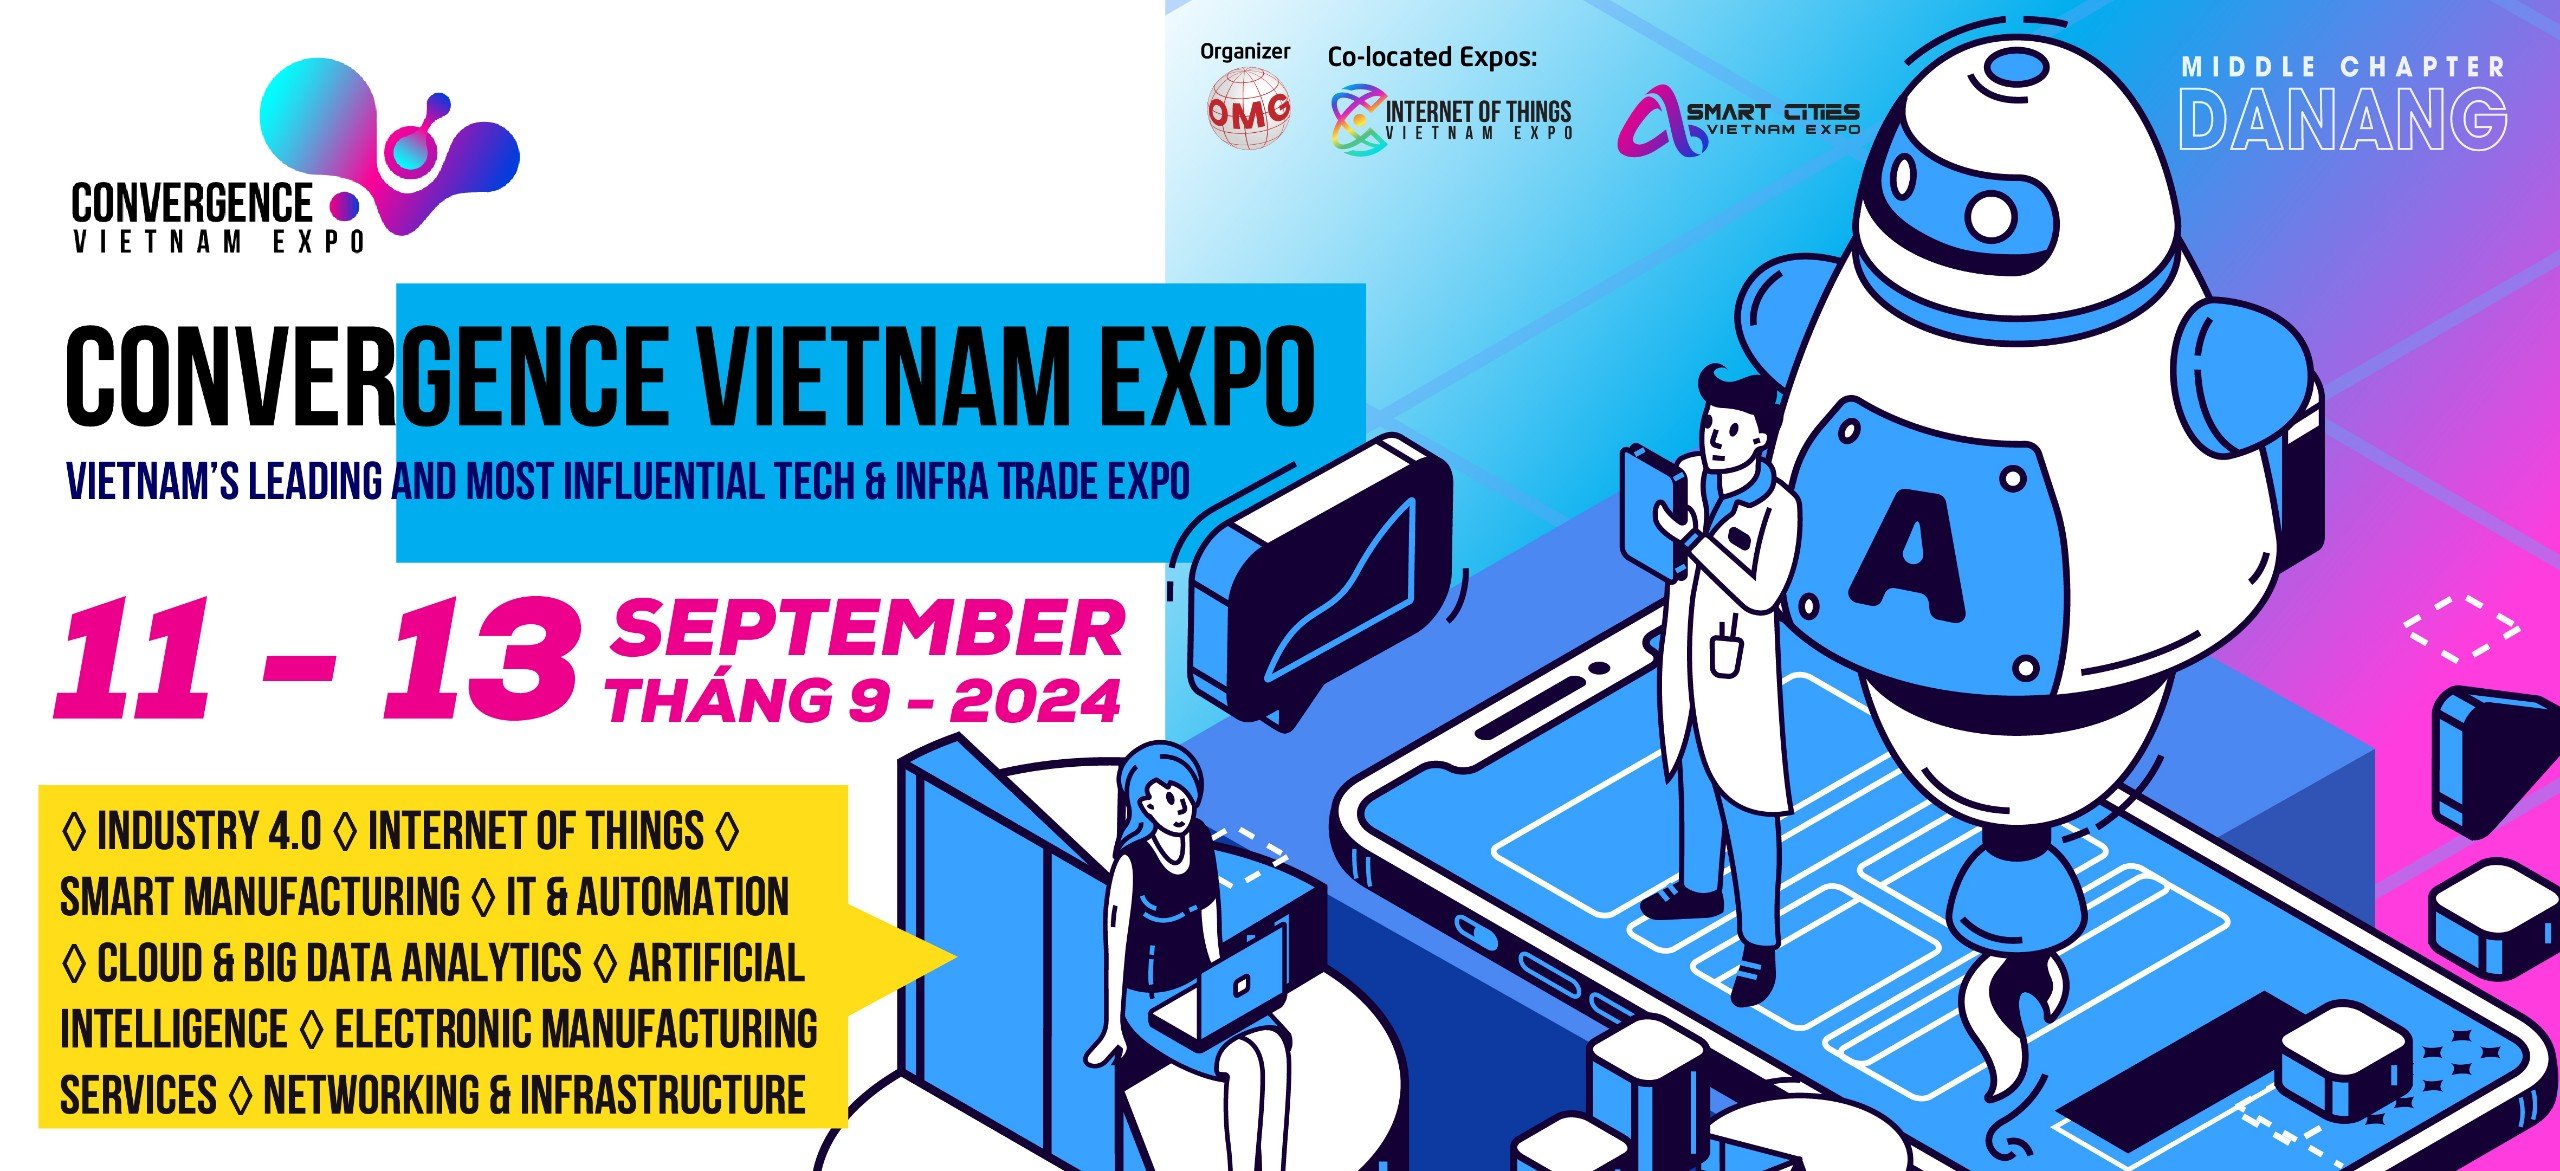 Convergence Vietnam Expo - Middle Chapter